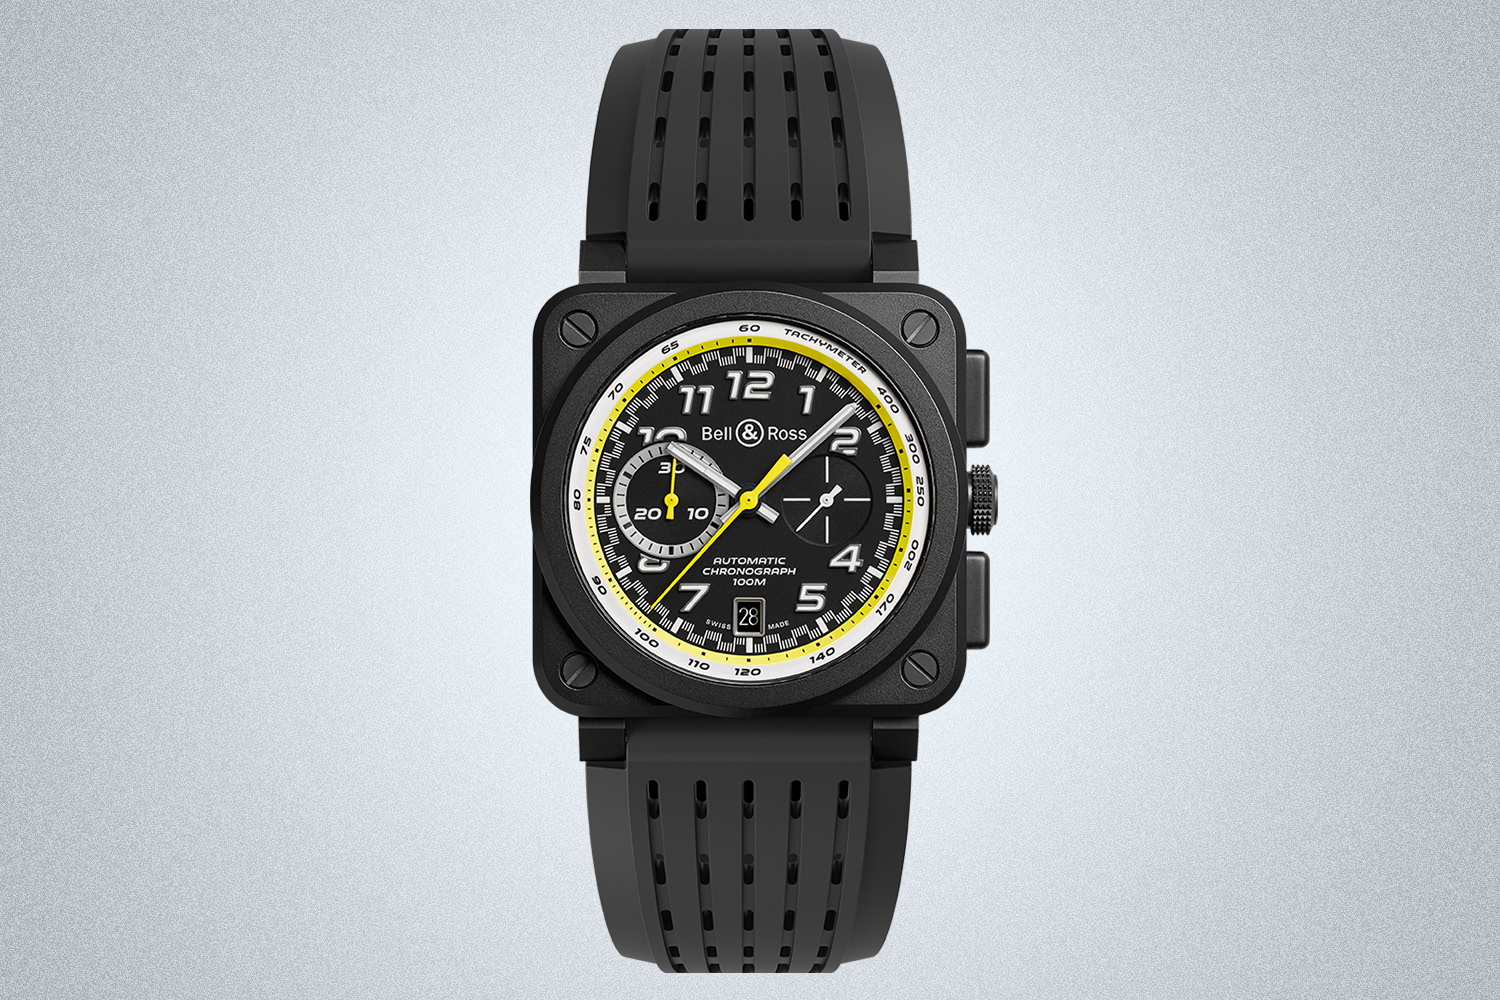 The Bell & Ross BR 03-94 R.S.20 men's watch inspired by Renault cars